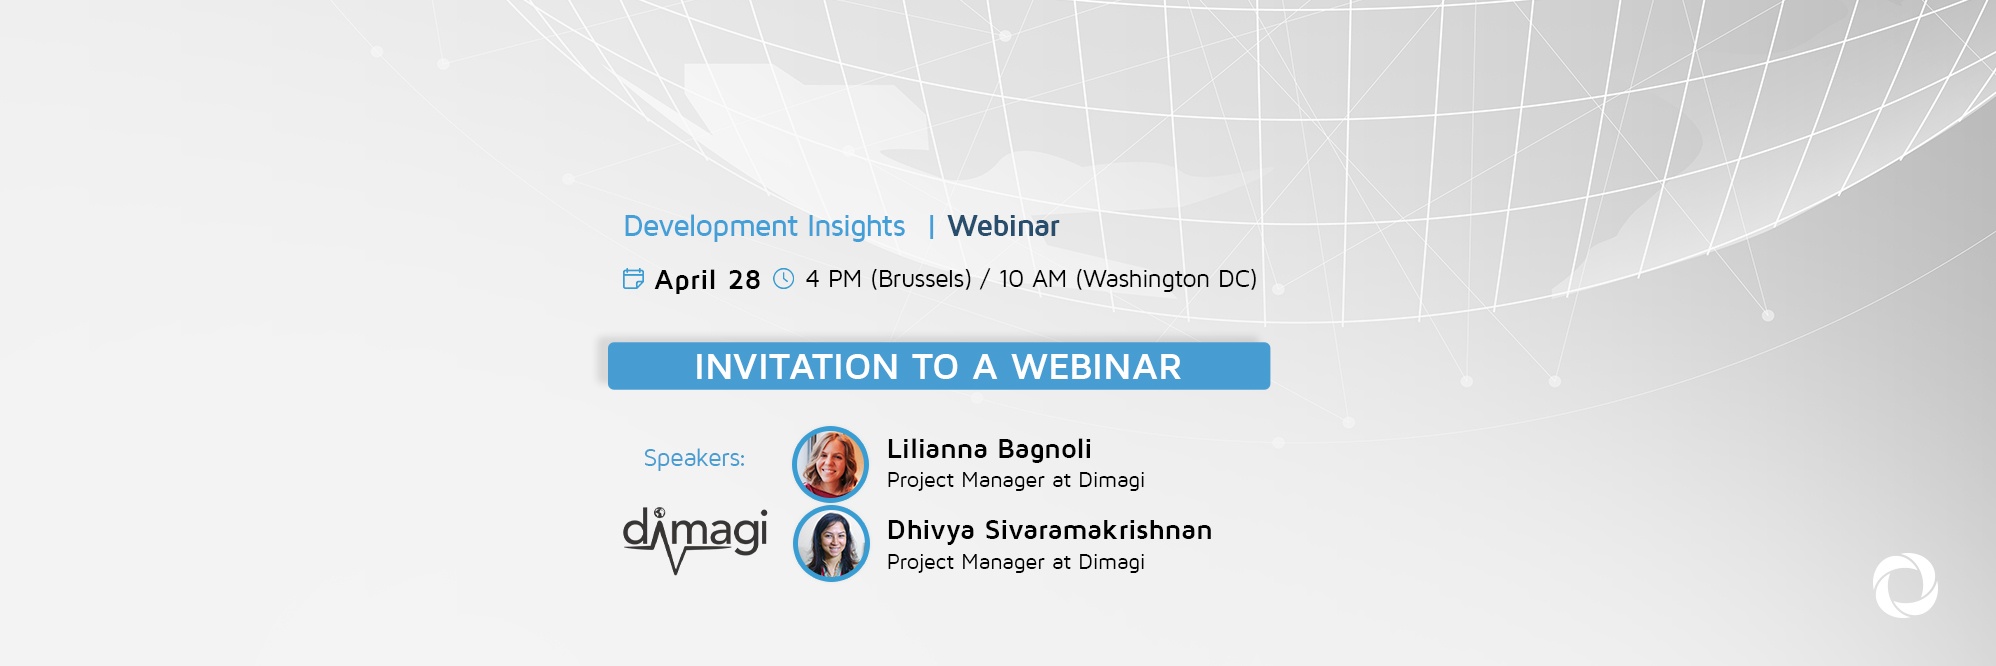 Best practices for the successful management of digital projects | Invitation to a Webinar